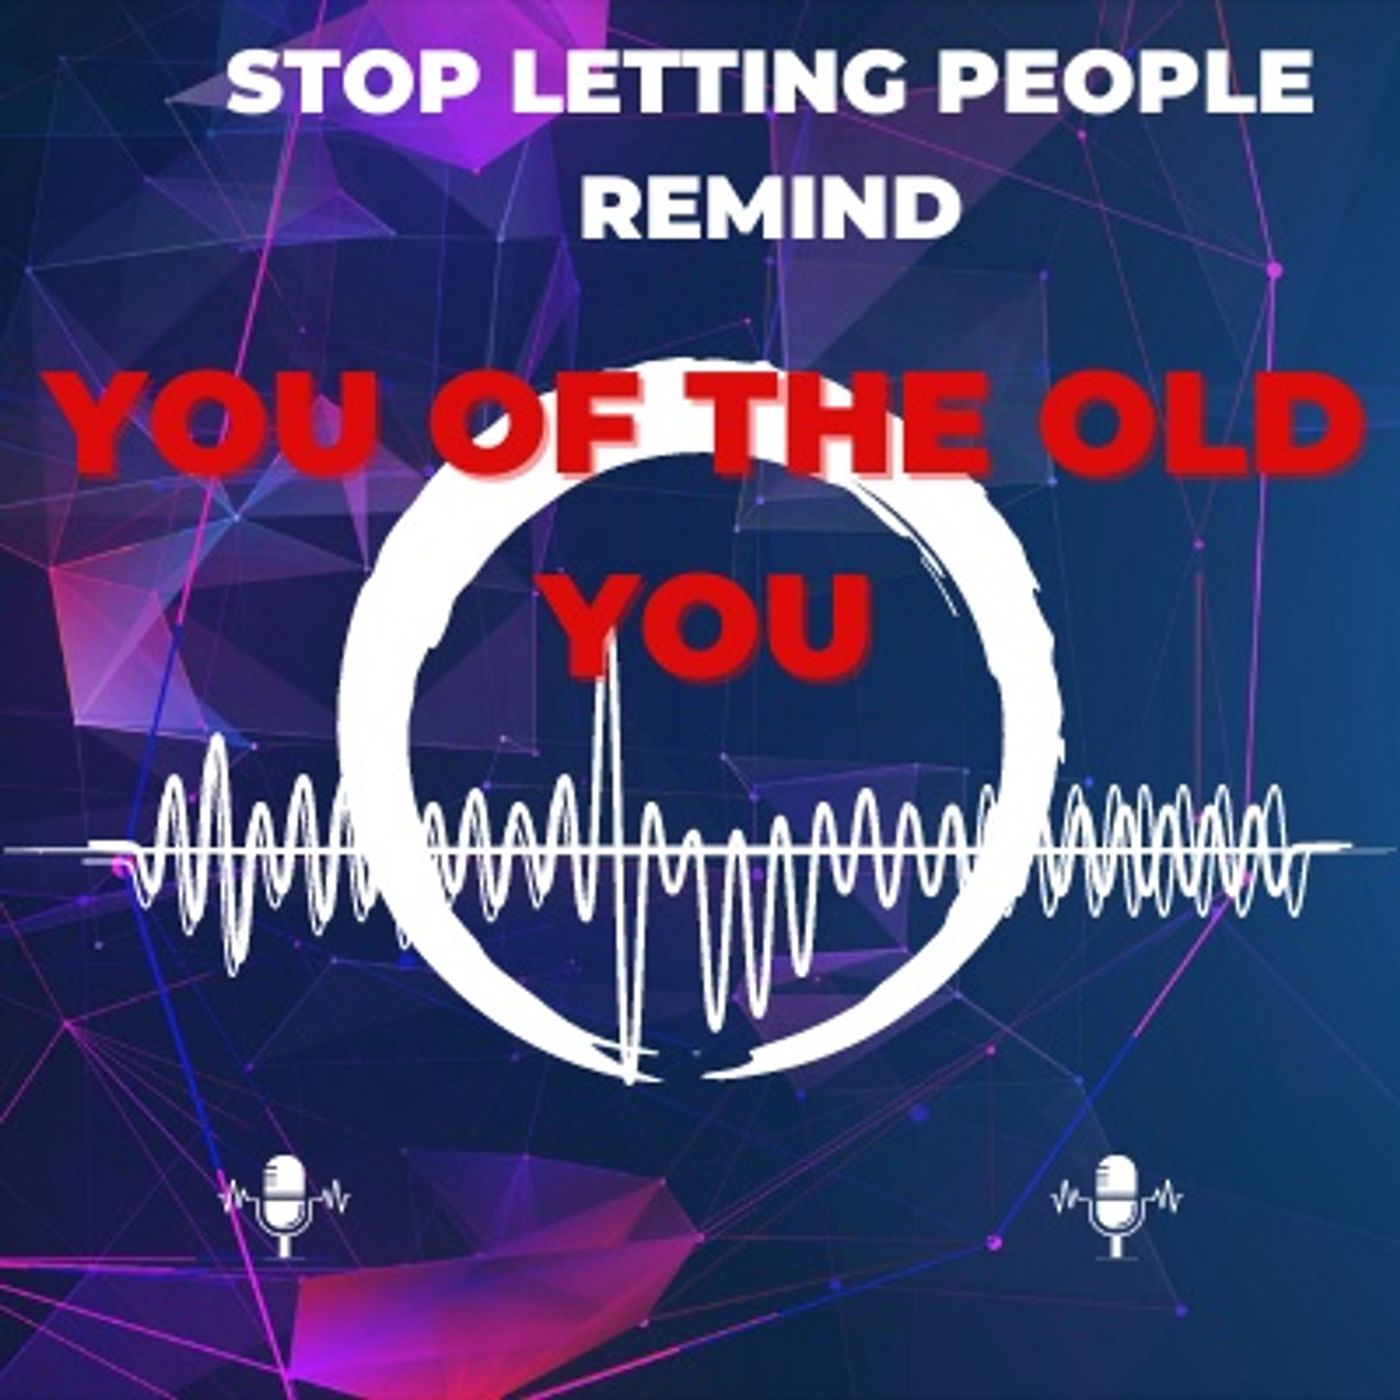 STOP LETTING PEOPLE REMIND YOU OF THE OLD YOU